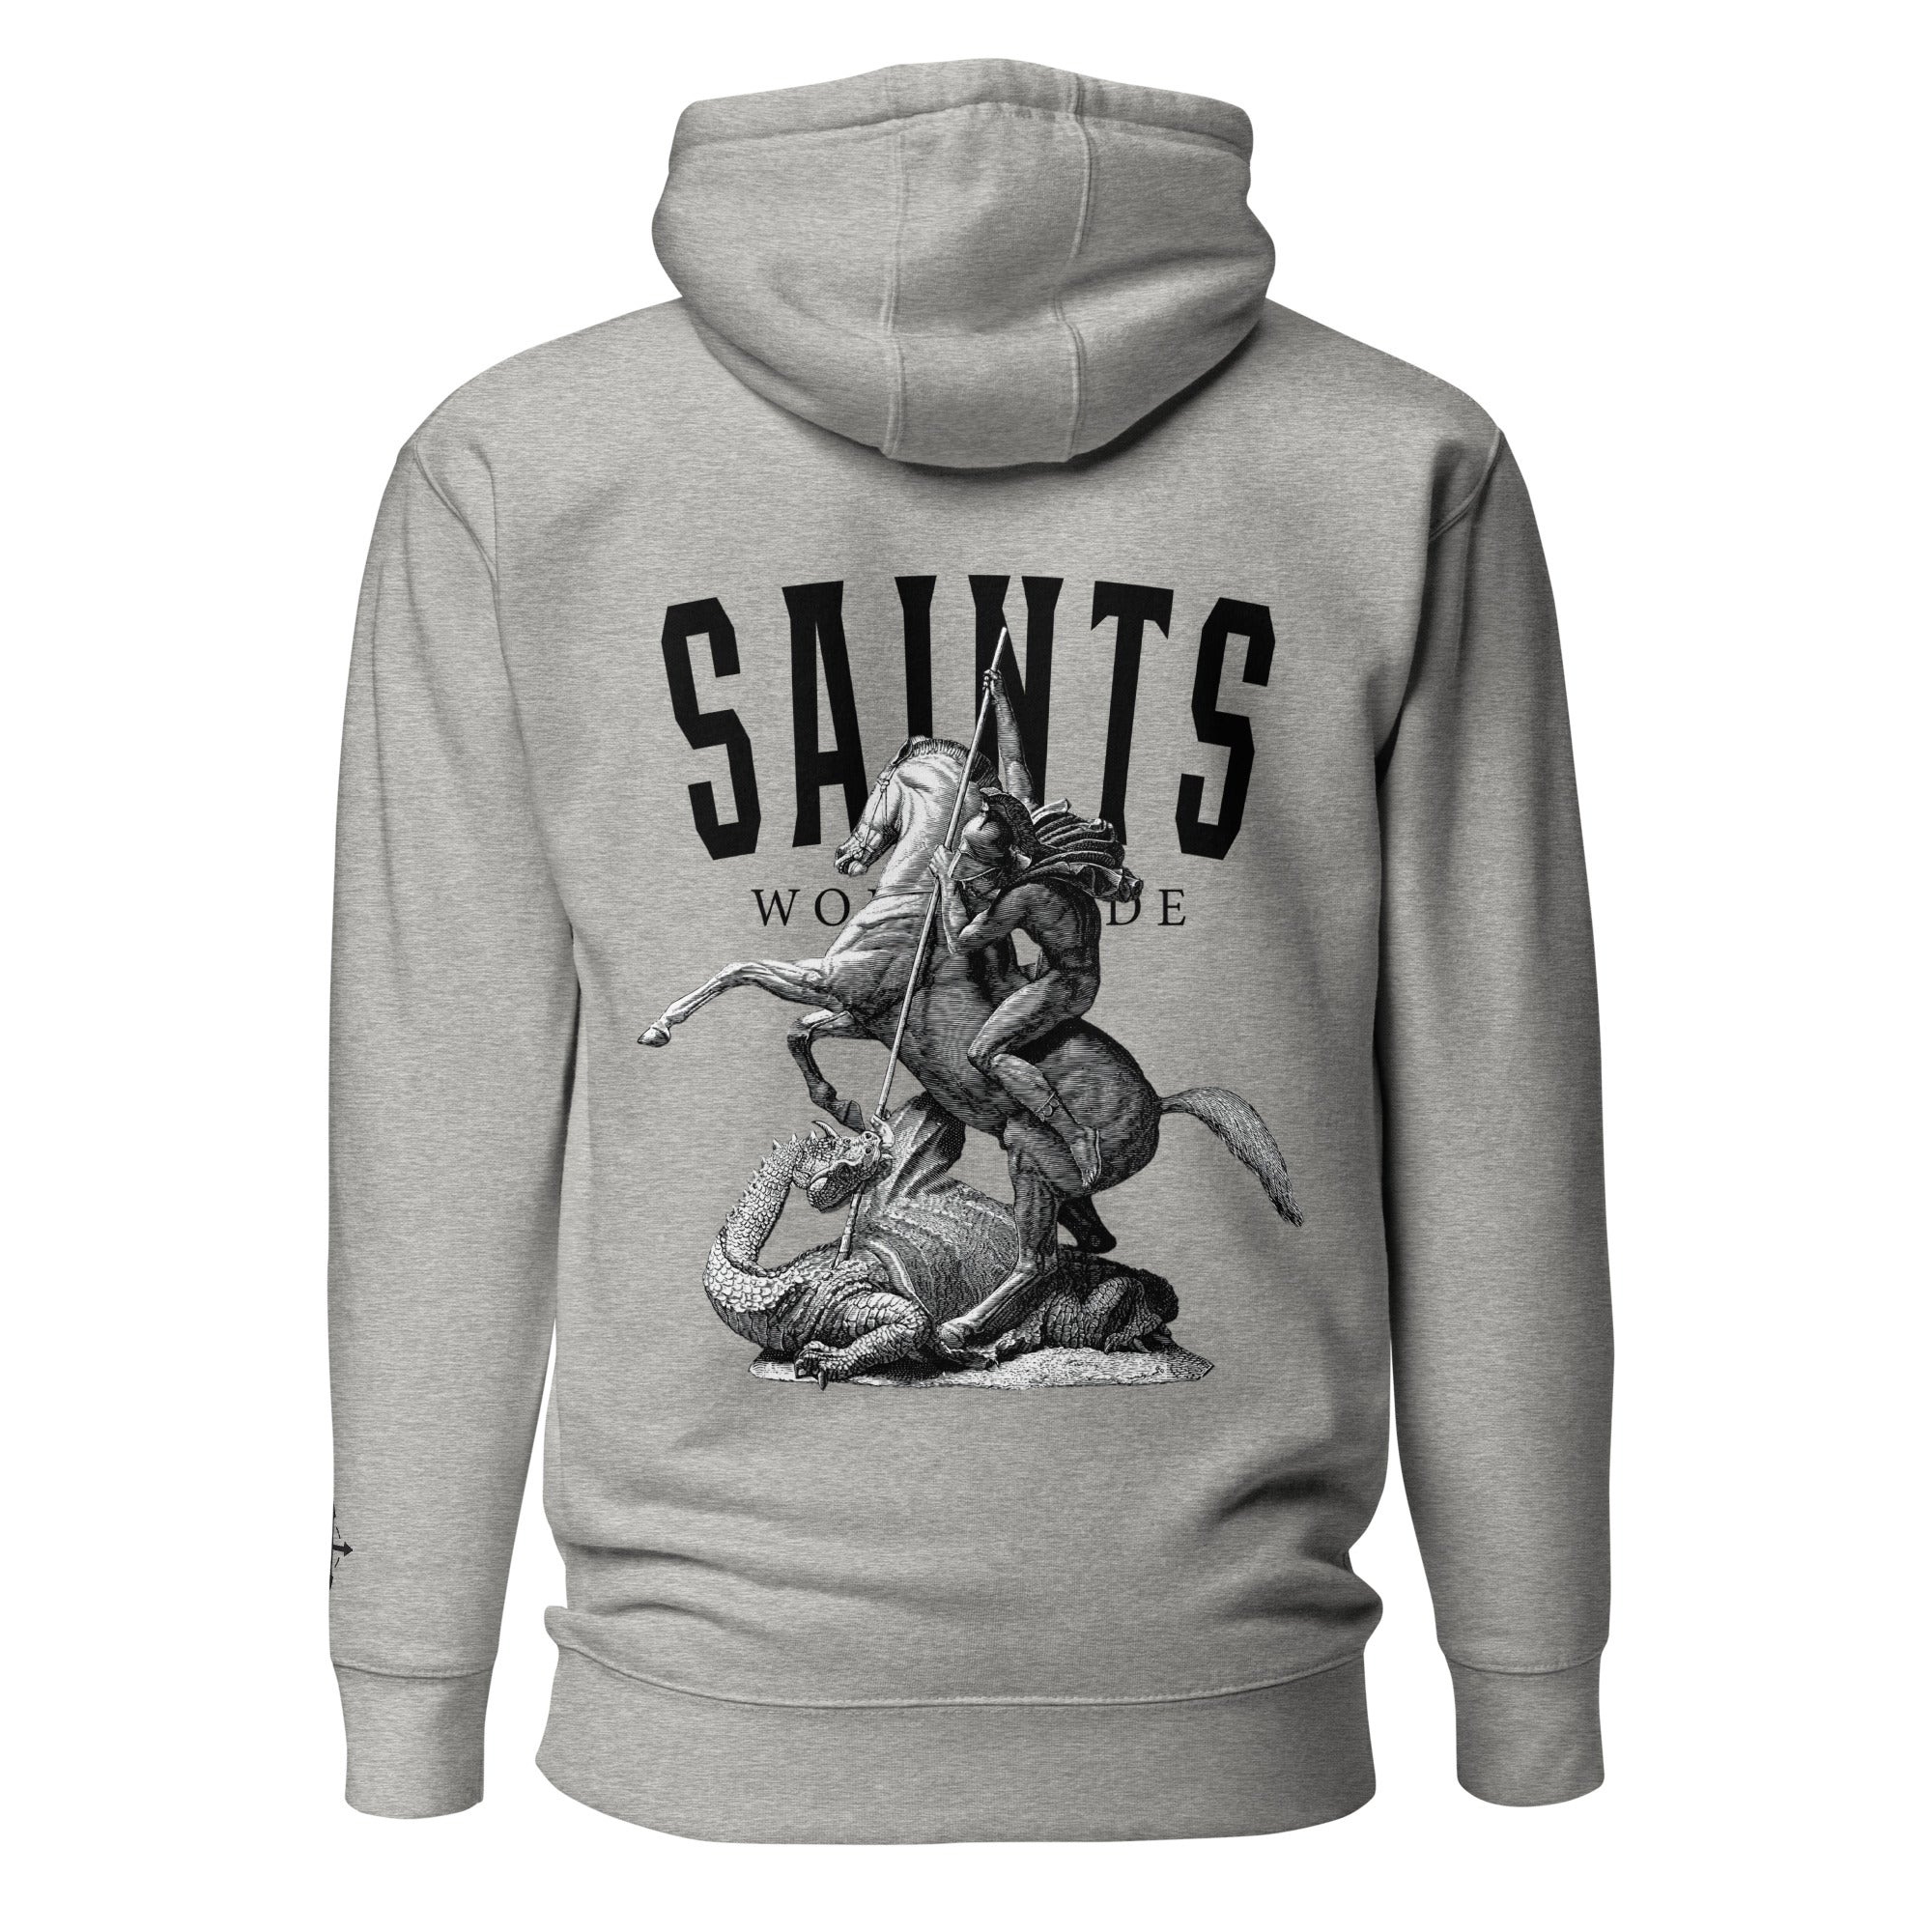 SAINTS WORLDWIDE Embroidered Hoodie - Grey - Great Commission Company